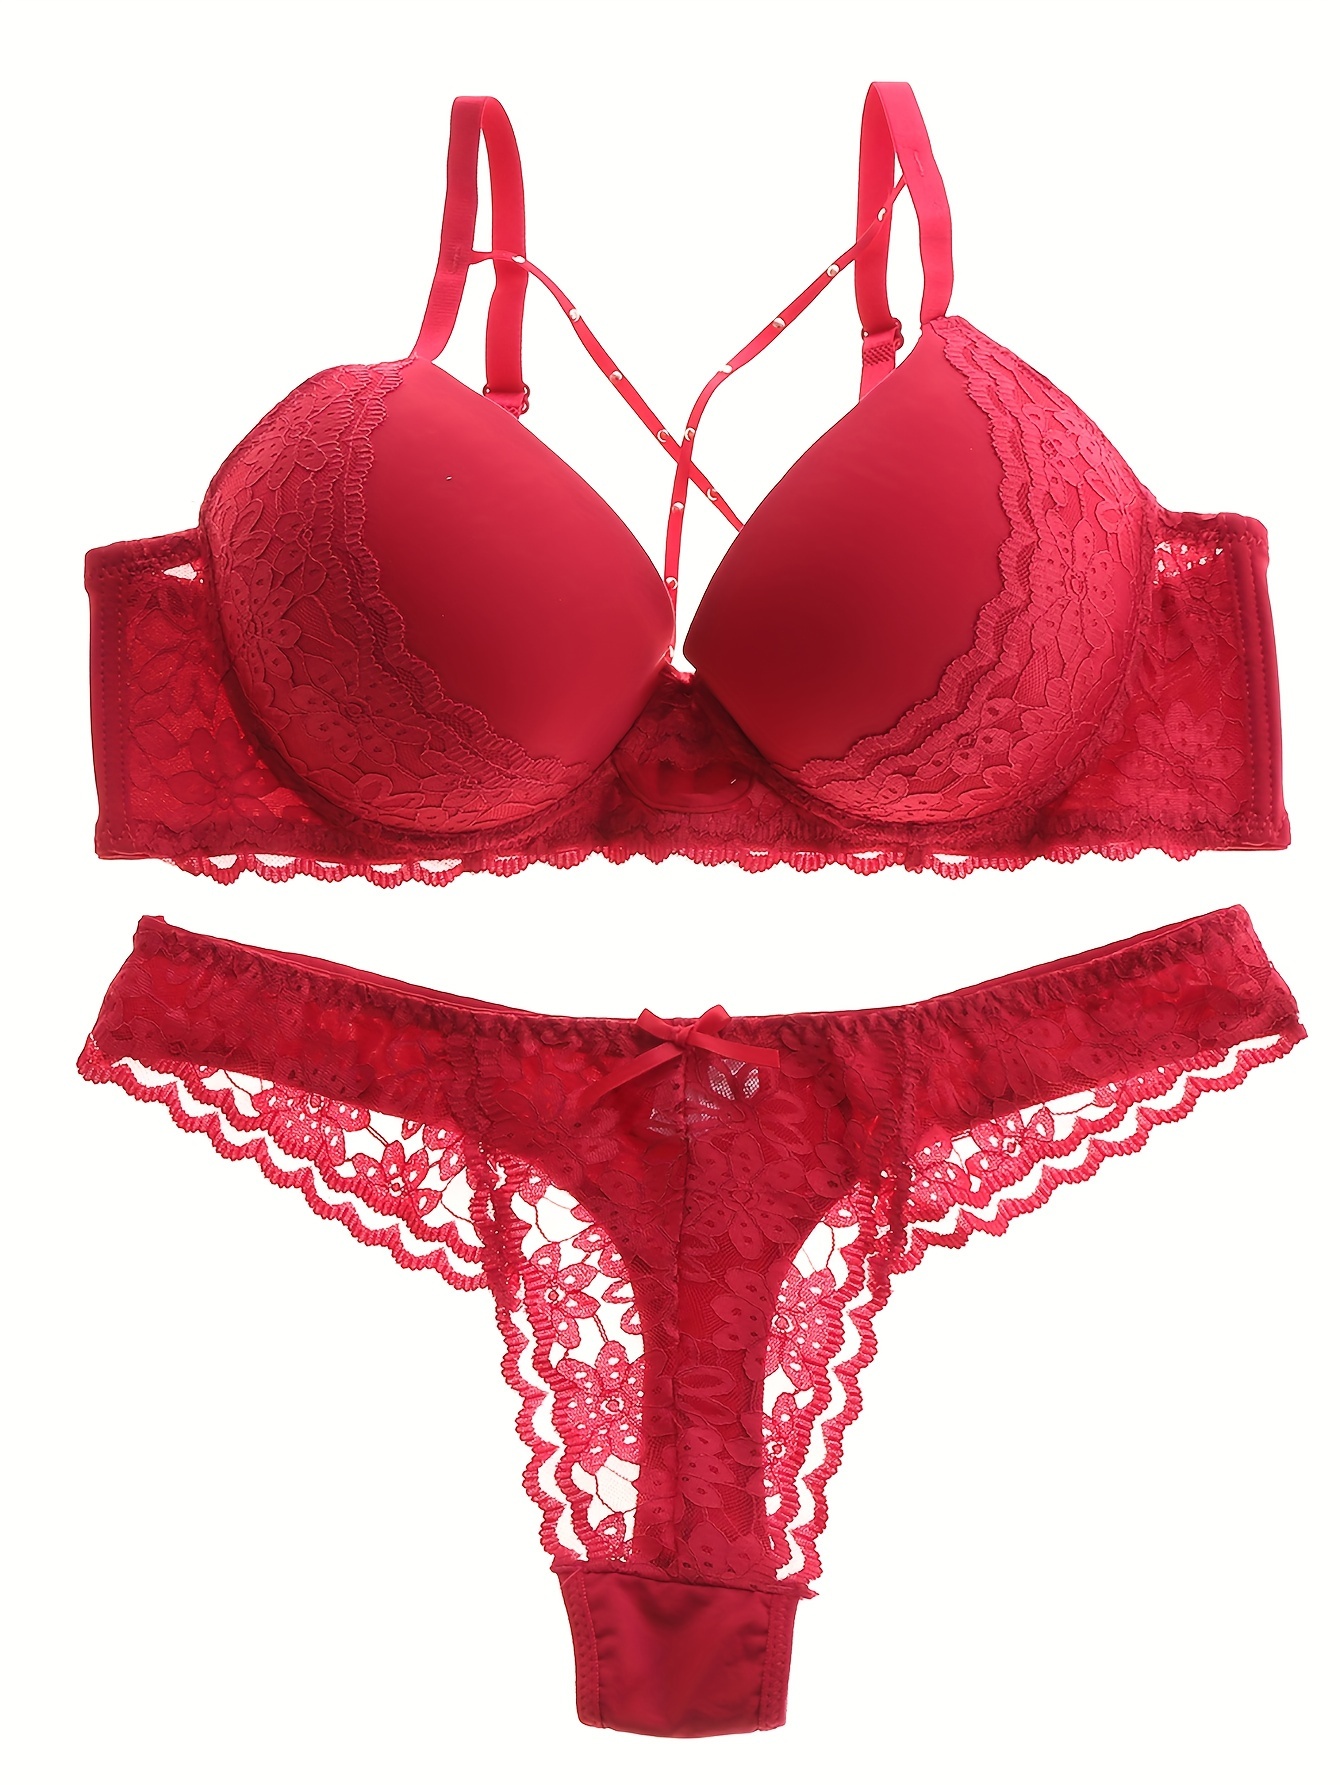 Women`s Lace Underwear of Red, Wine Color: Bra and Panties. Stock Photo -  Image of elegance, elegant: 112964836